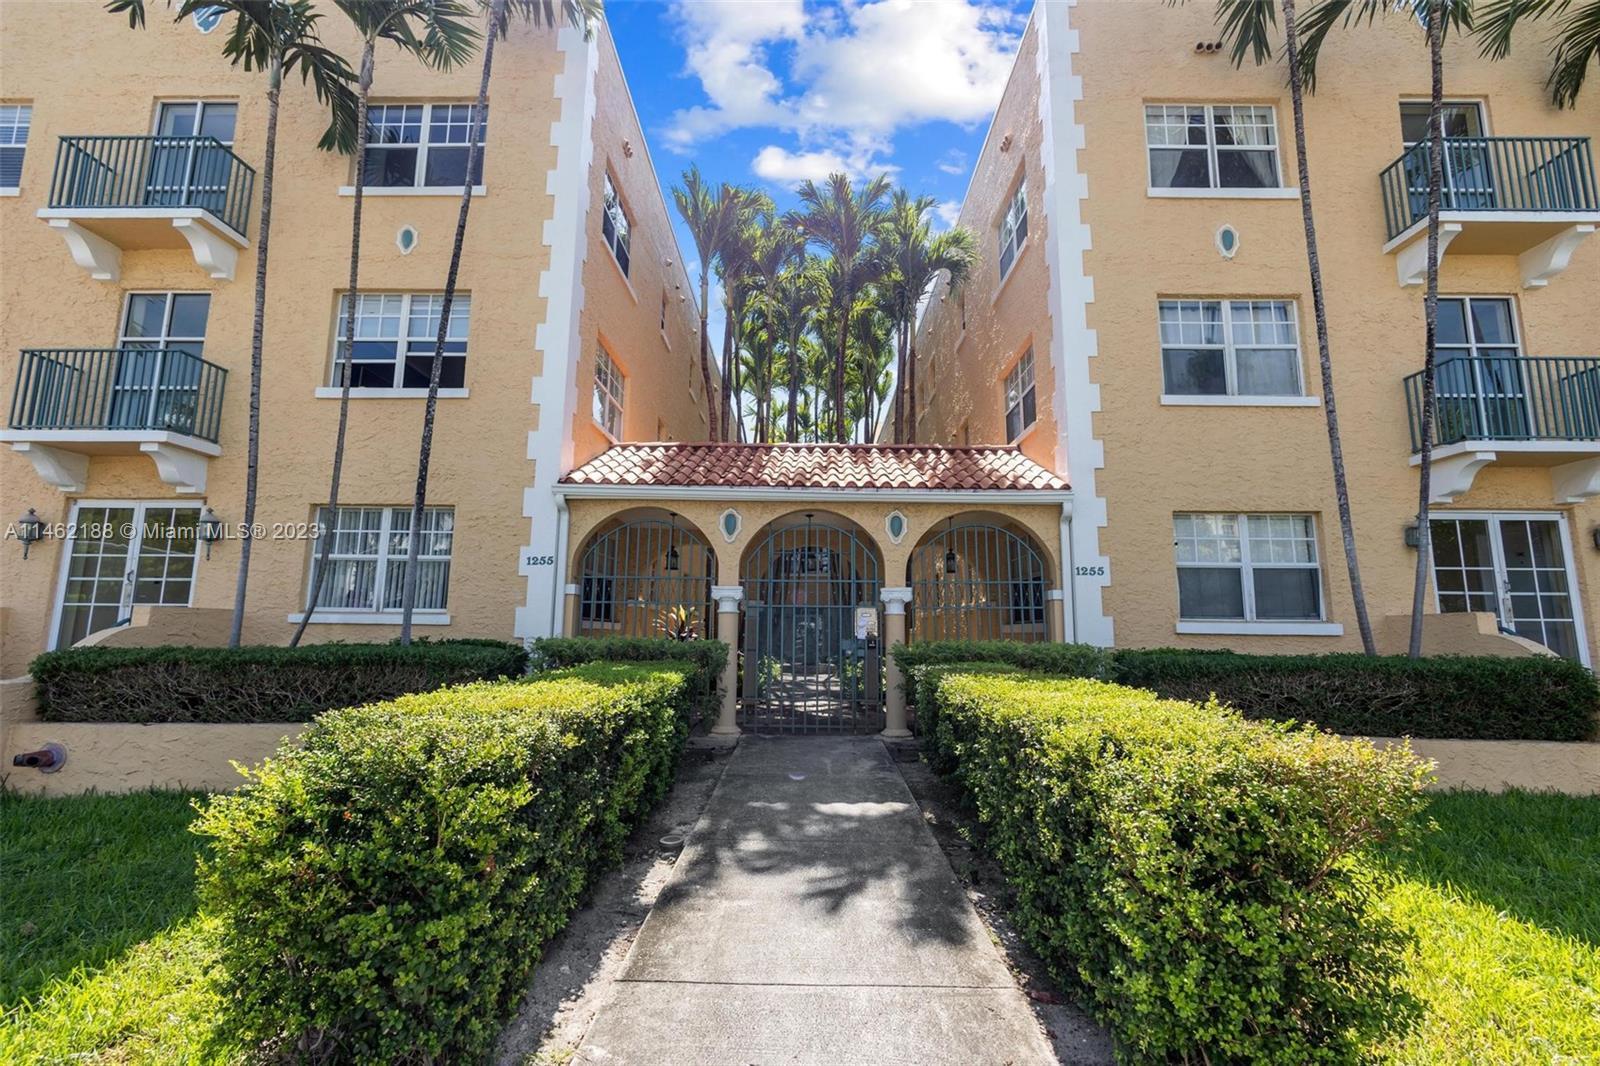 Stunning 1BD/1BA top-floor corner unit in the heart of South Beach's historic charm. Just blocks fro